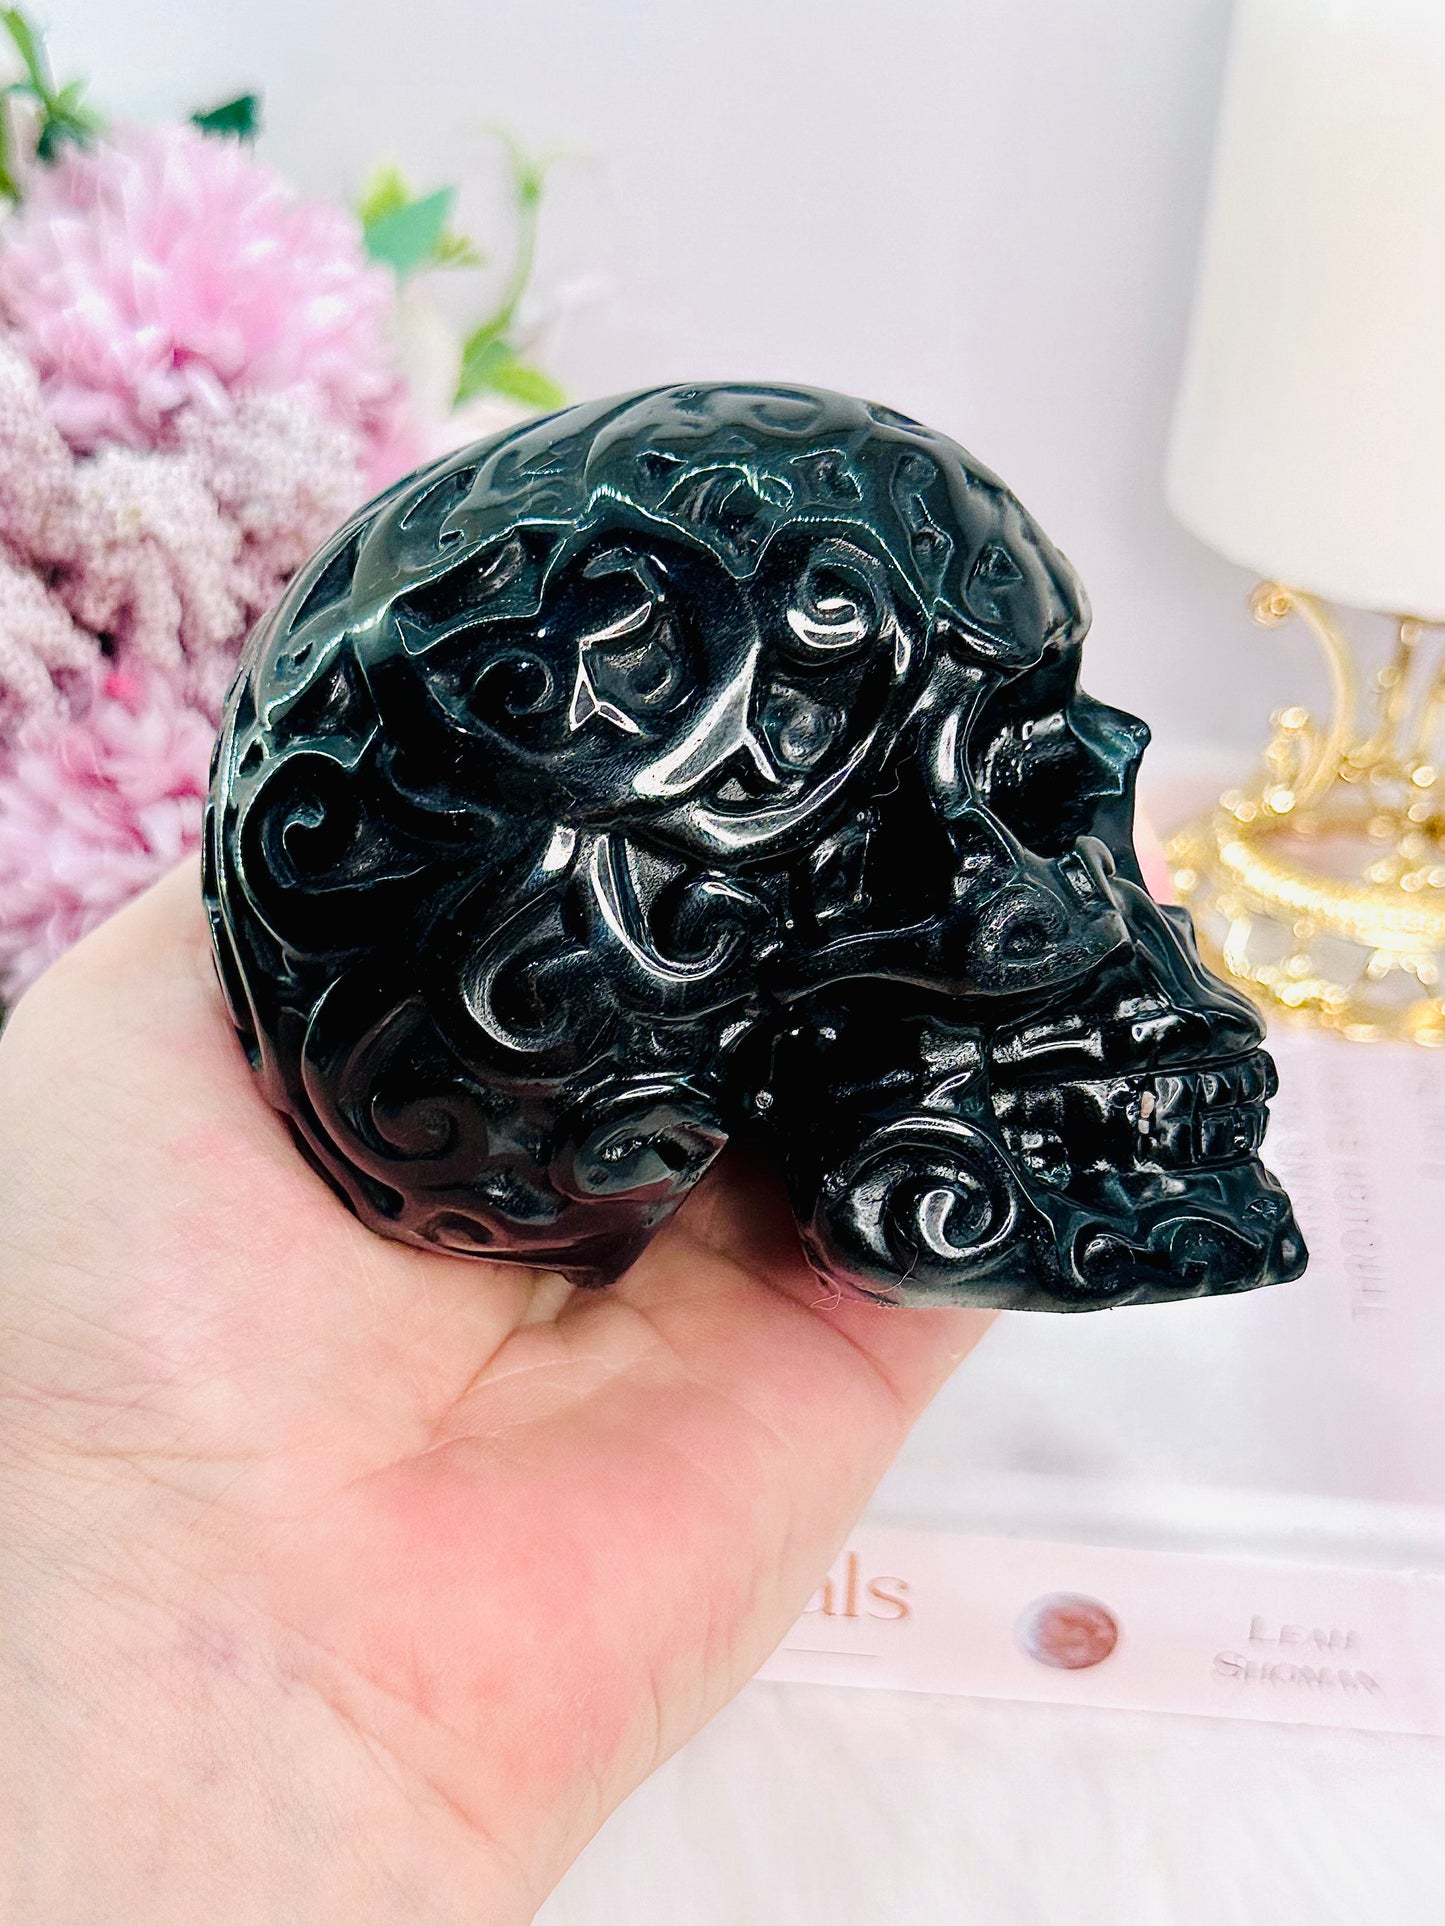 My Personal Favourite!!! Large Stunning Carved Black Obsidian Skull 575grams Absolutely Unbelievable Gorgeous & Perfect